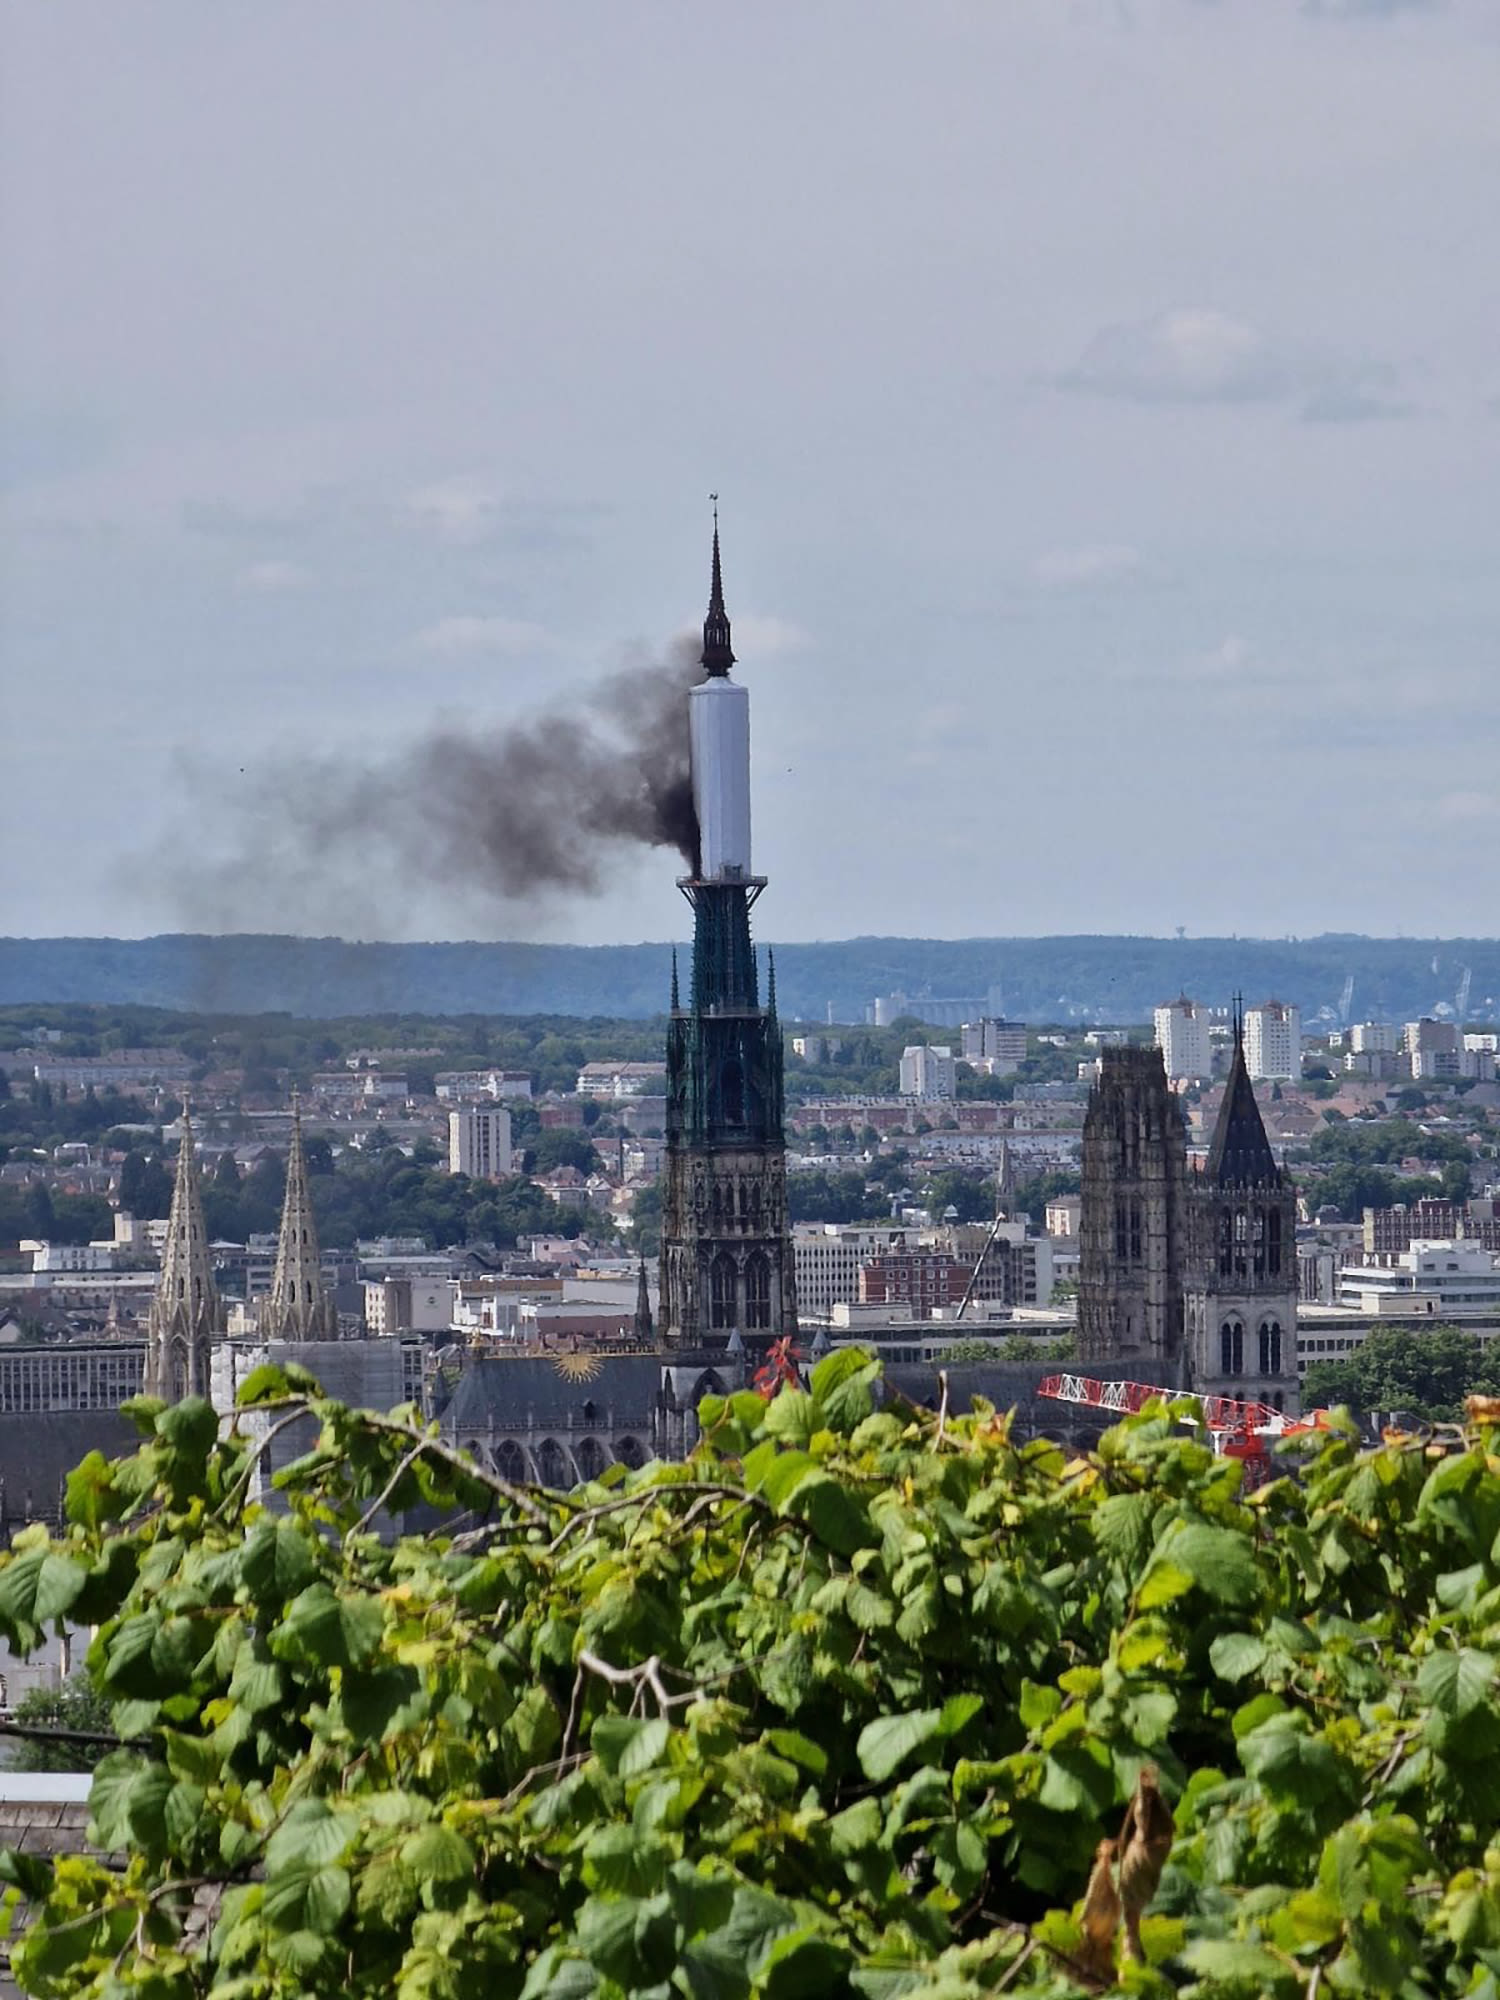 Fire Extinguished at Rouen Cathedral, a Frequent Subject of Monet's Paintings